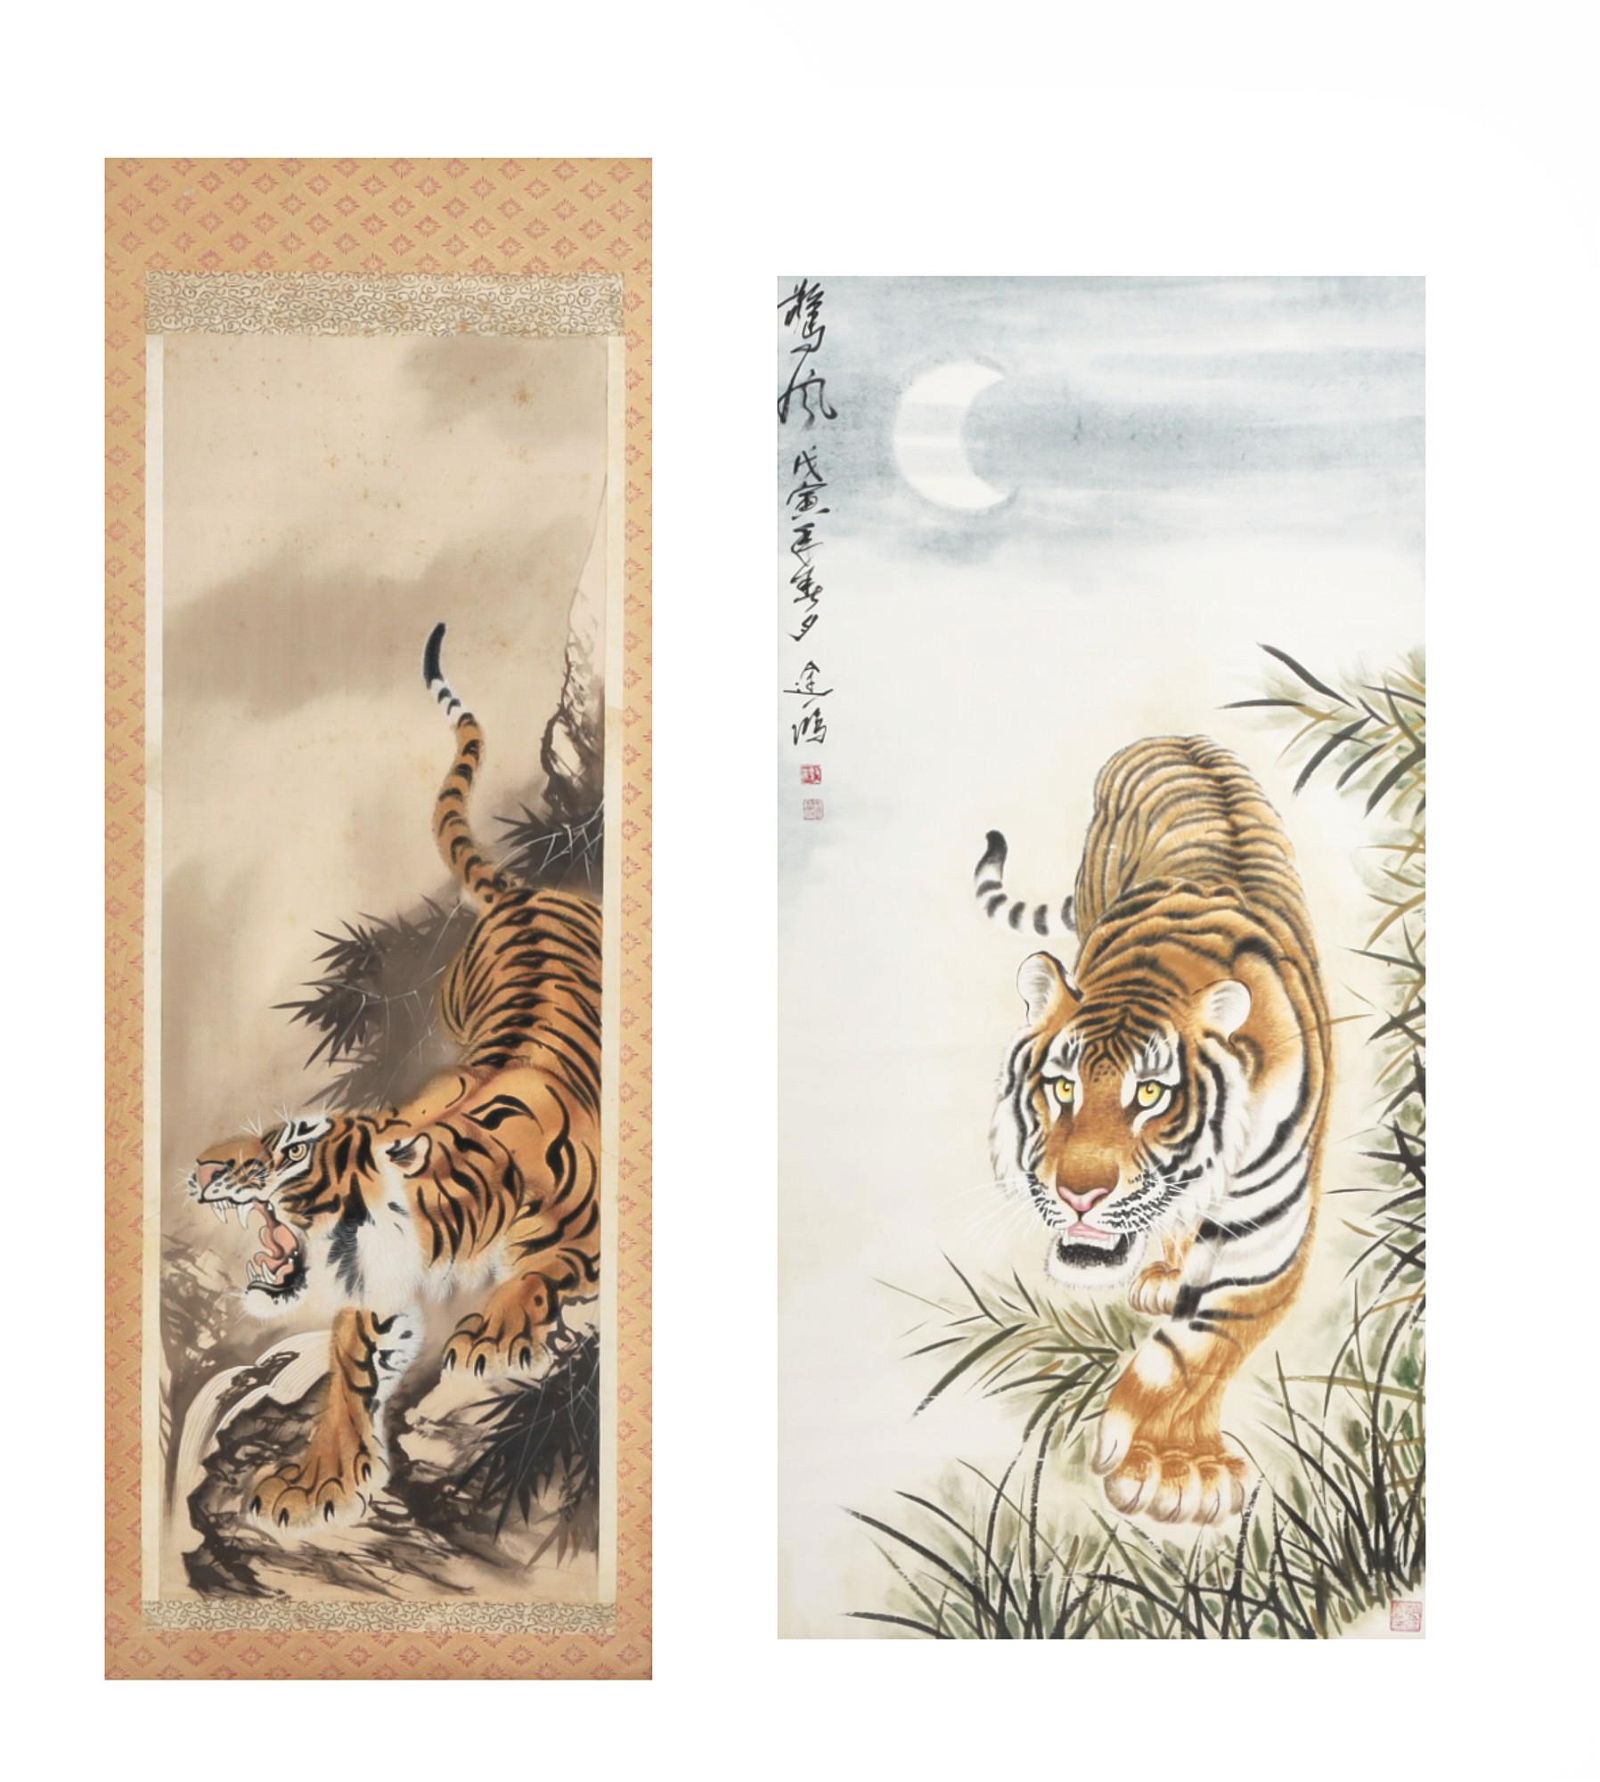 TWO ASIAN DEPICTIONS OF TIGERSTwo Asian